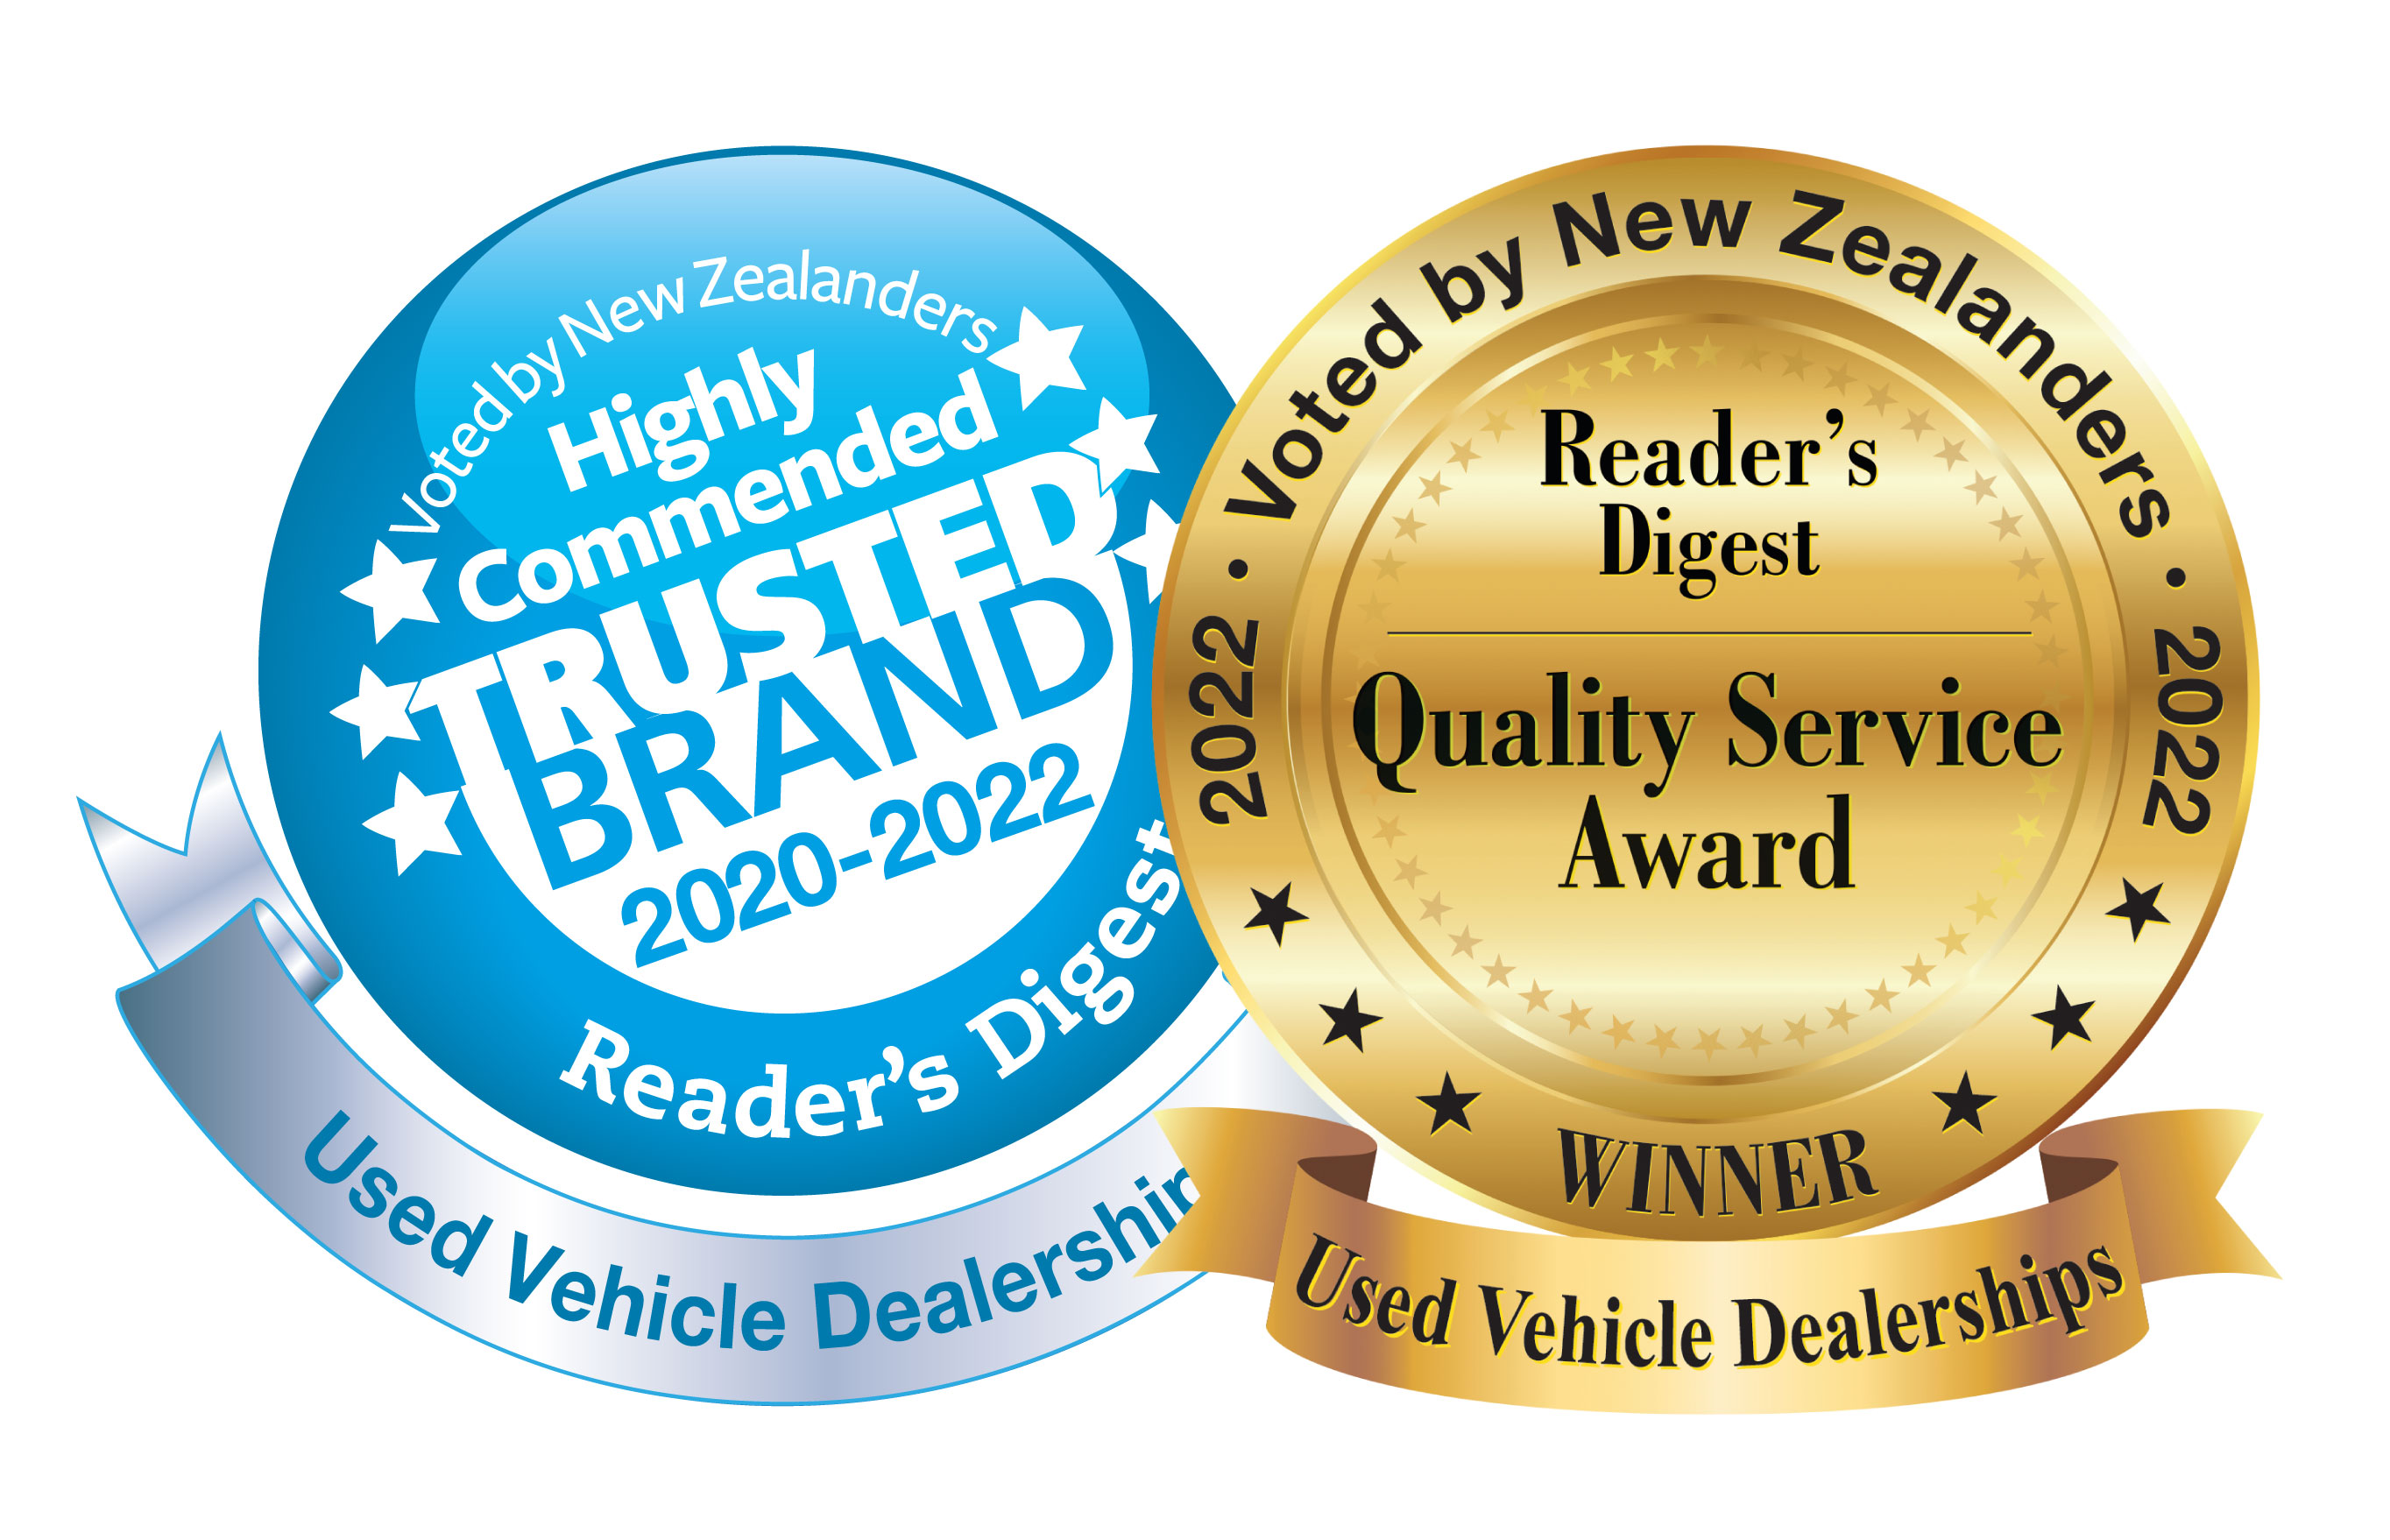 Most Trusted & Quality Service Awards